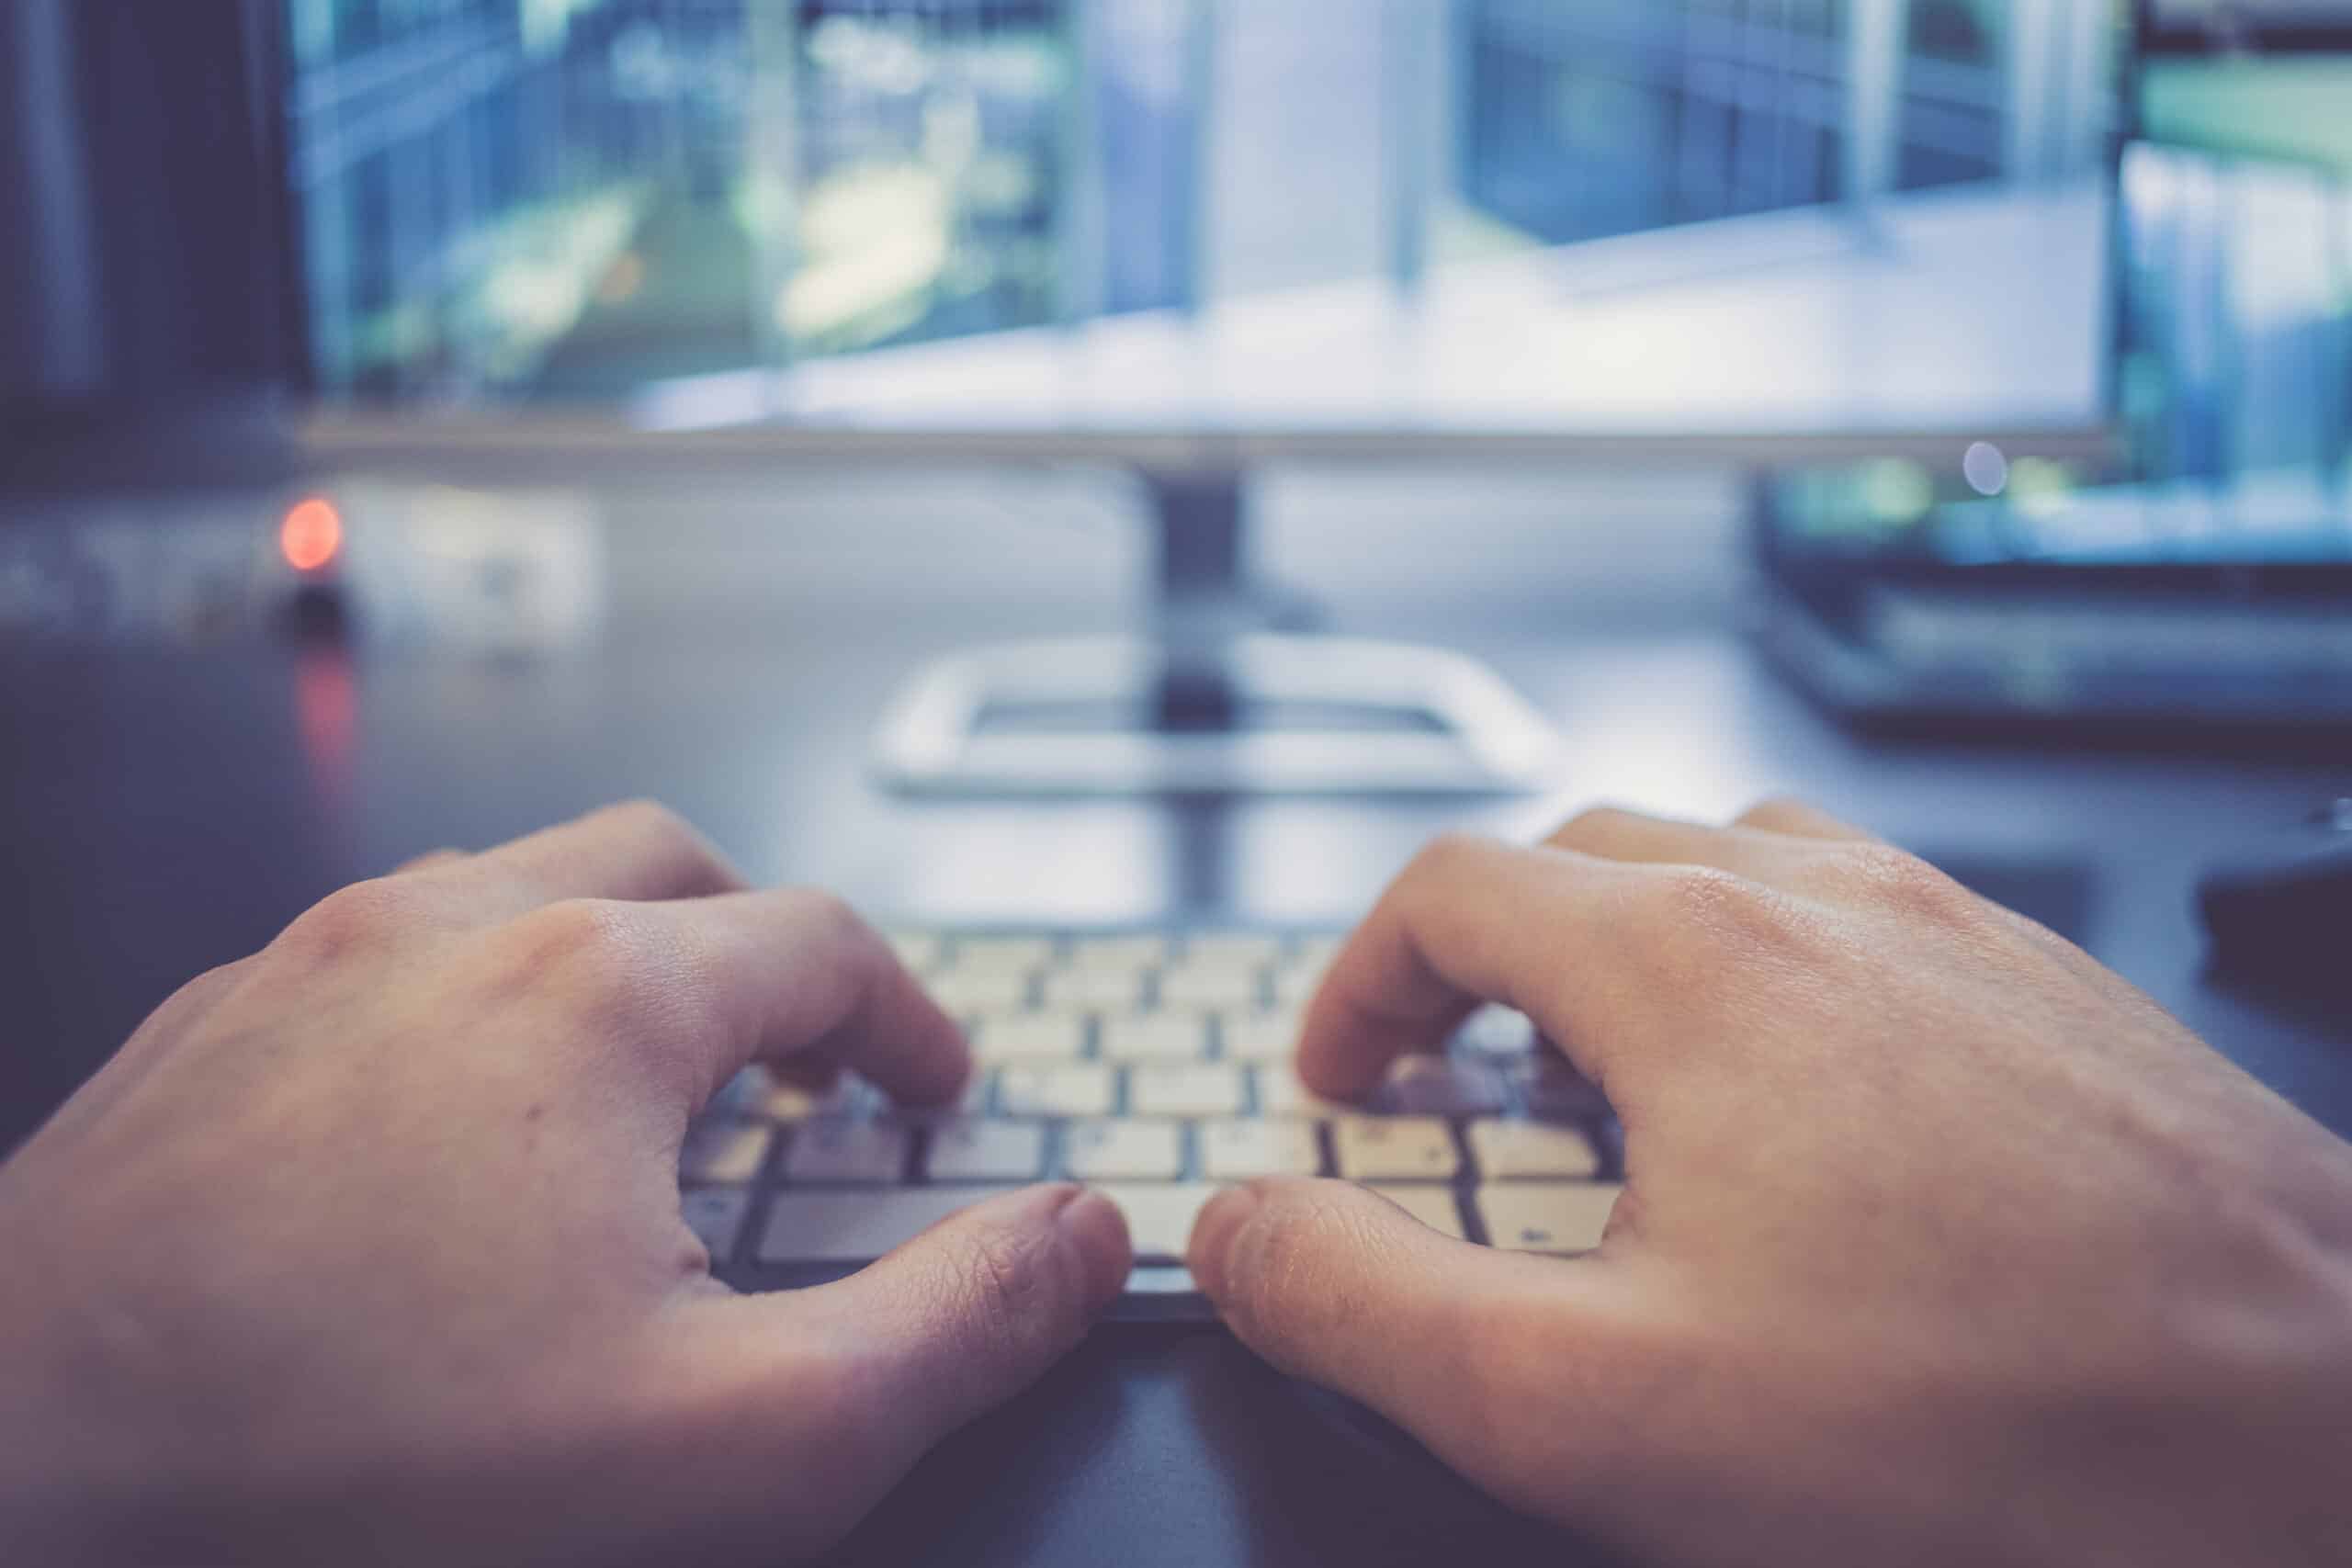 Hands are typing on a white keyboard, screen in the blurry background